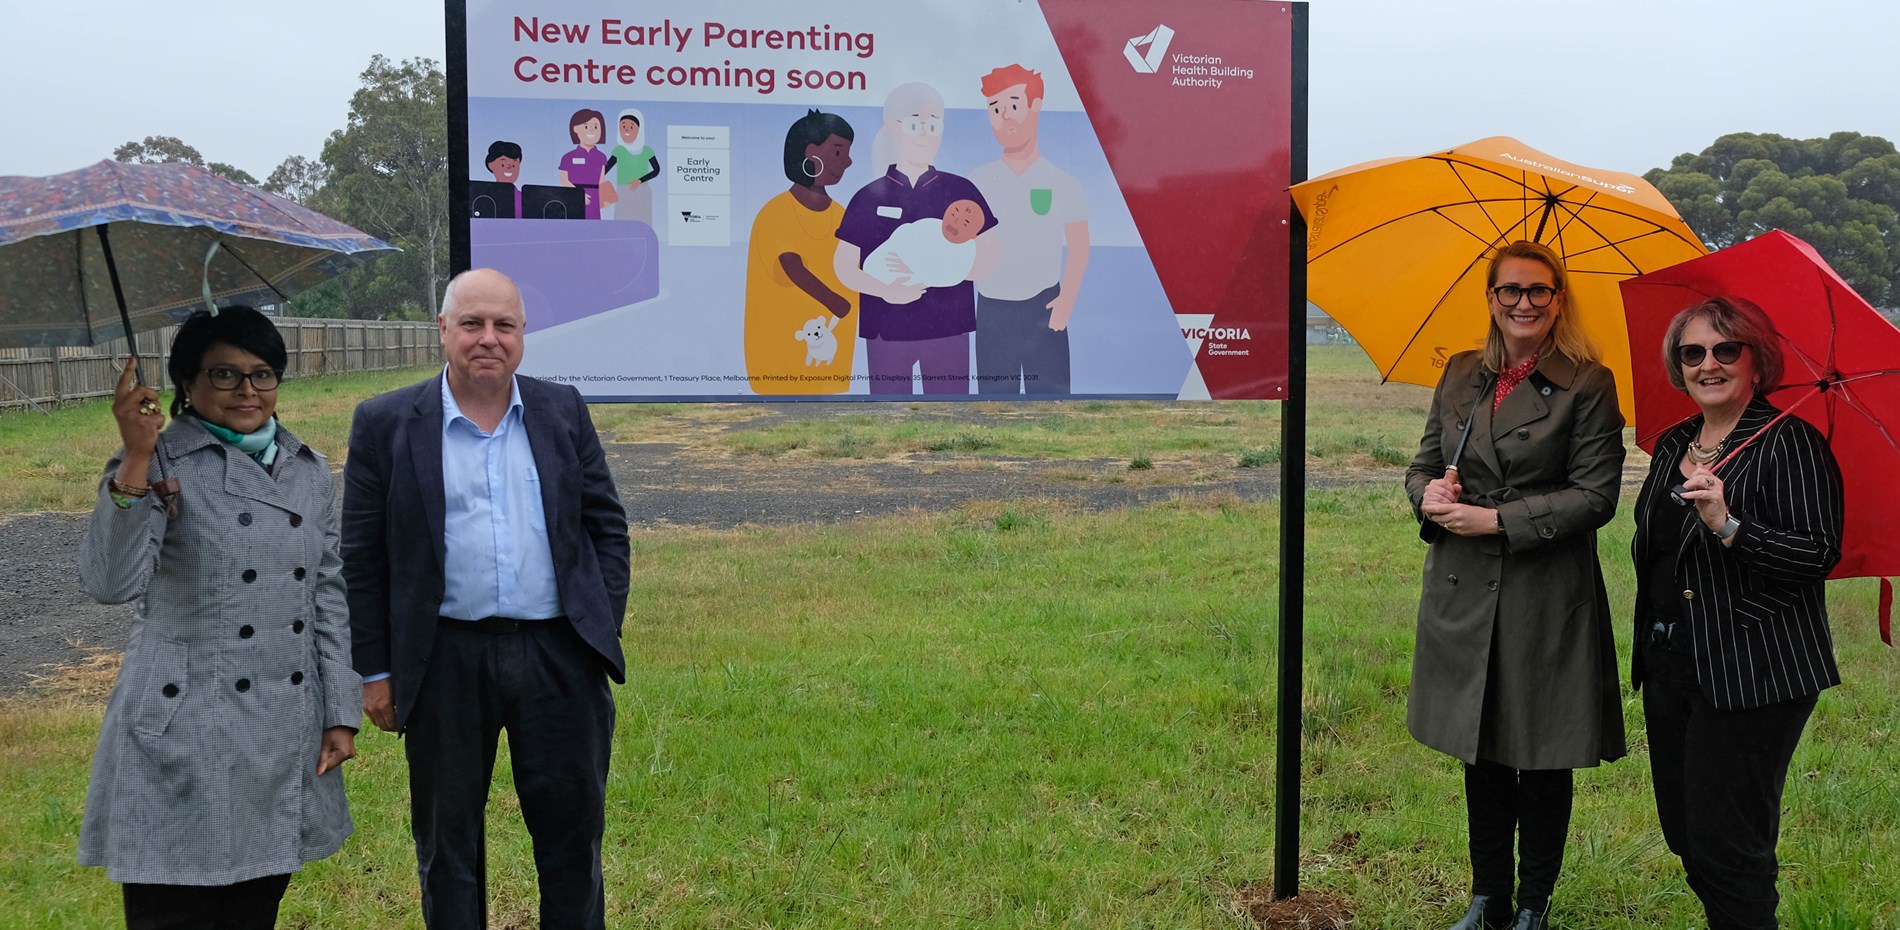 EARLY PARENTING CENTRE FOR WYNDHAM ANOTHER STEP CLOSER  Main Image